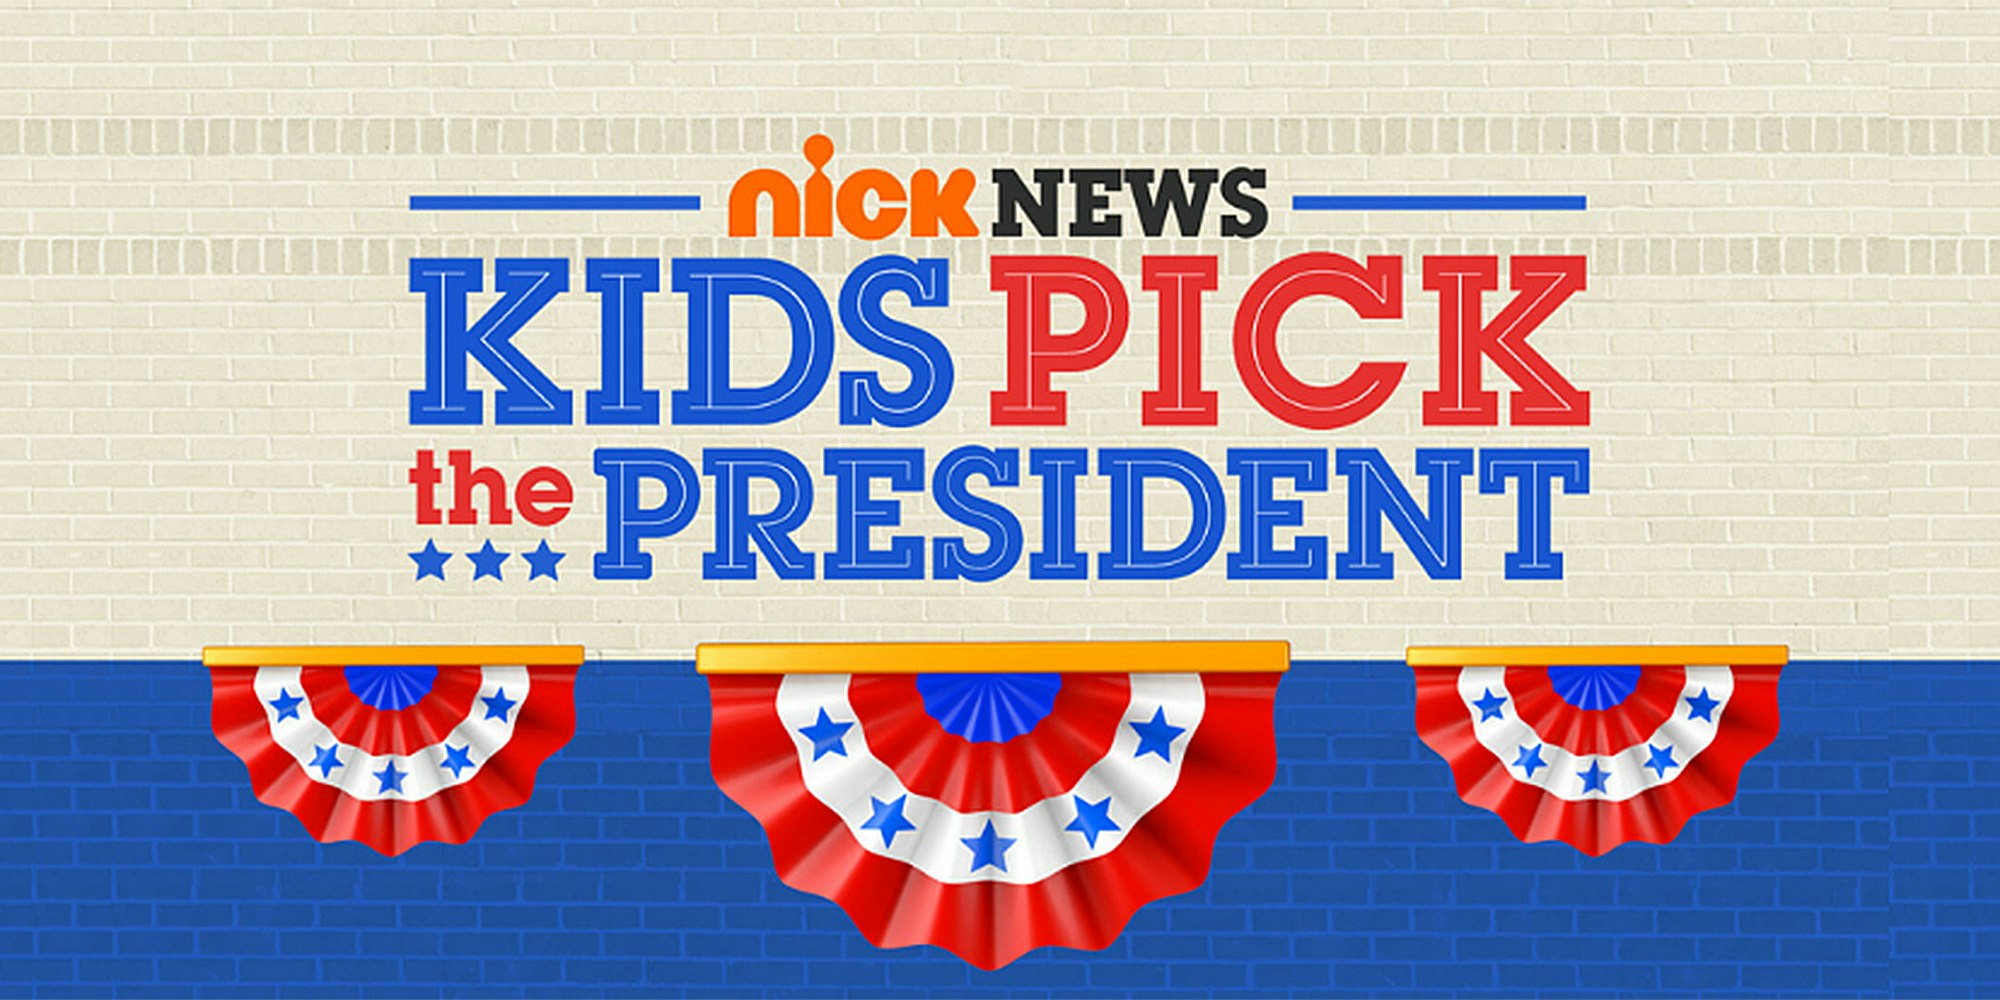 4chan Trolls Interfere with Nickelodeon Presidential Poll